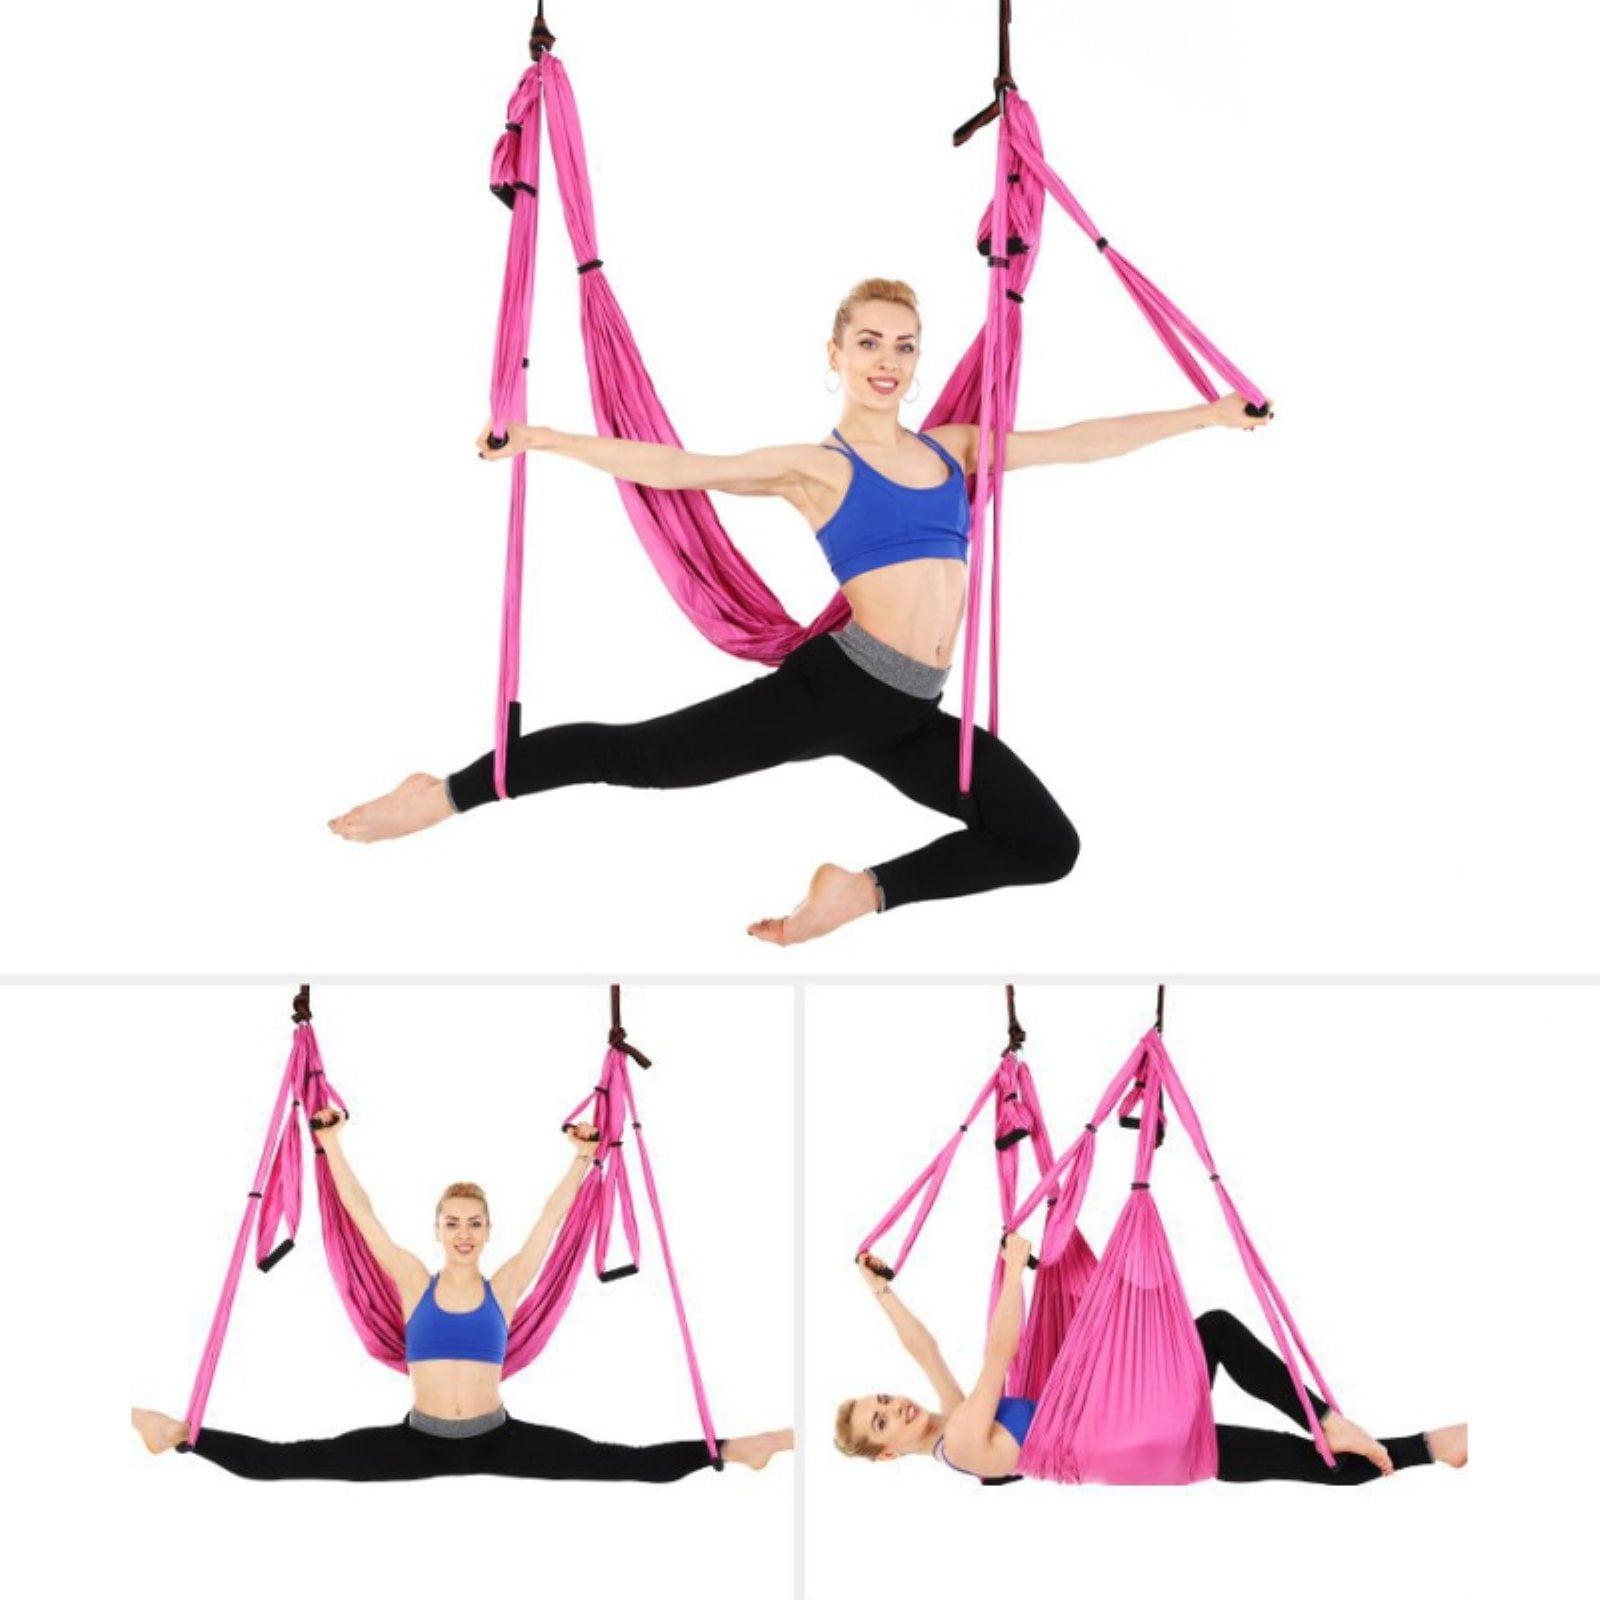 ROYAL WIND Aerial Yoga Swing Set Yoga Hammock Sling Kit Wide Flying Trapeze Inversion Tool Extension Straps Antigravity Ceiling Hanging Inversion Home Gym Fitness for Beginners Adult & Kids